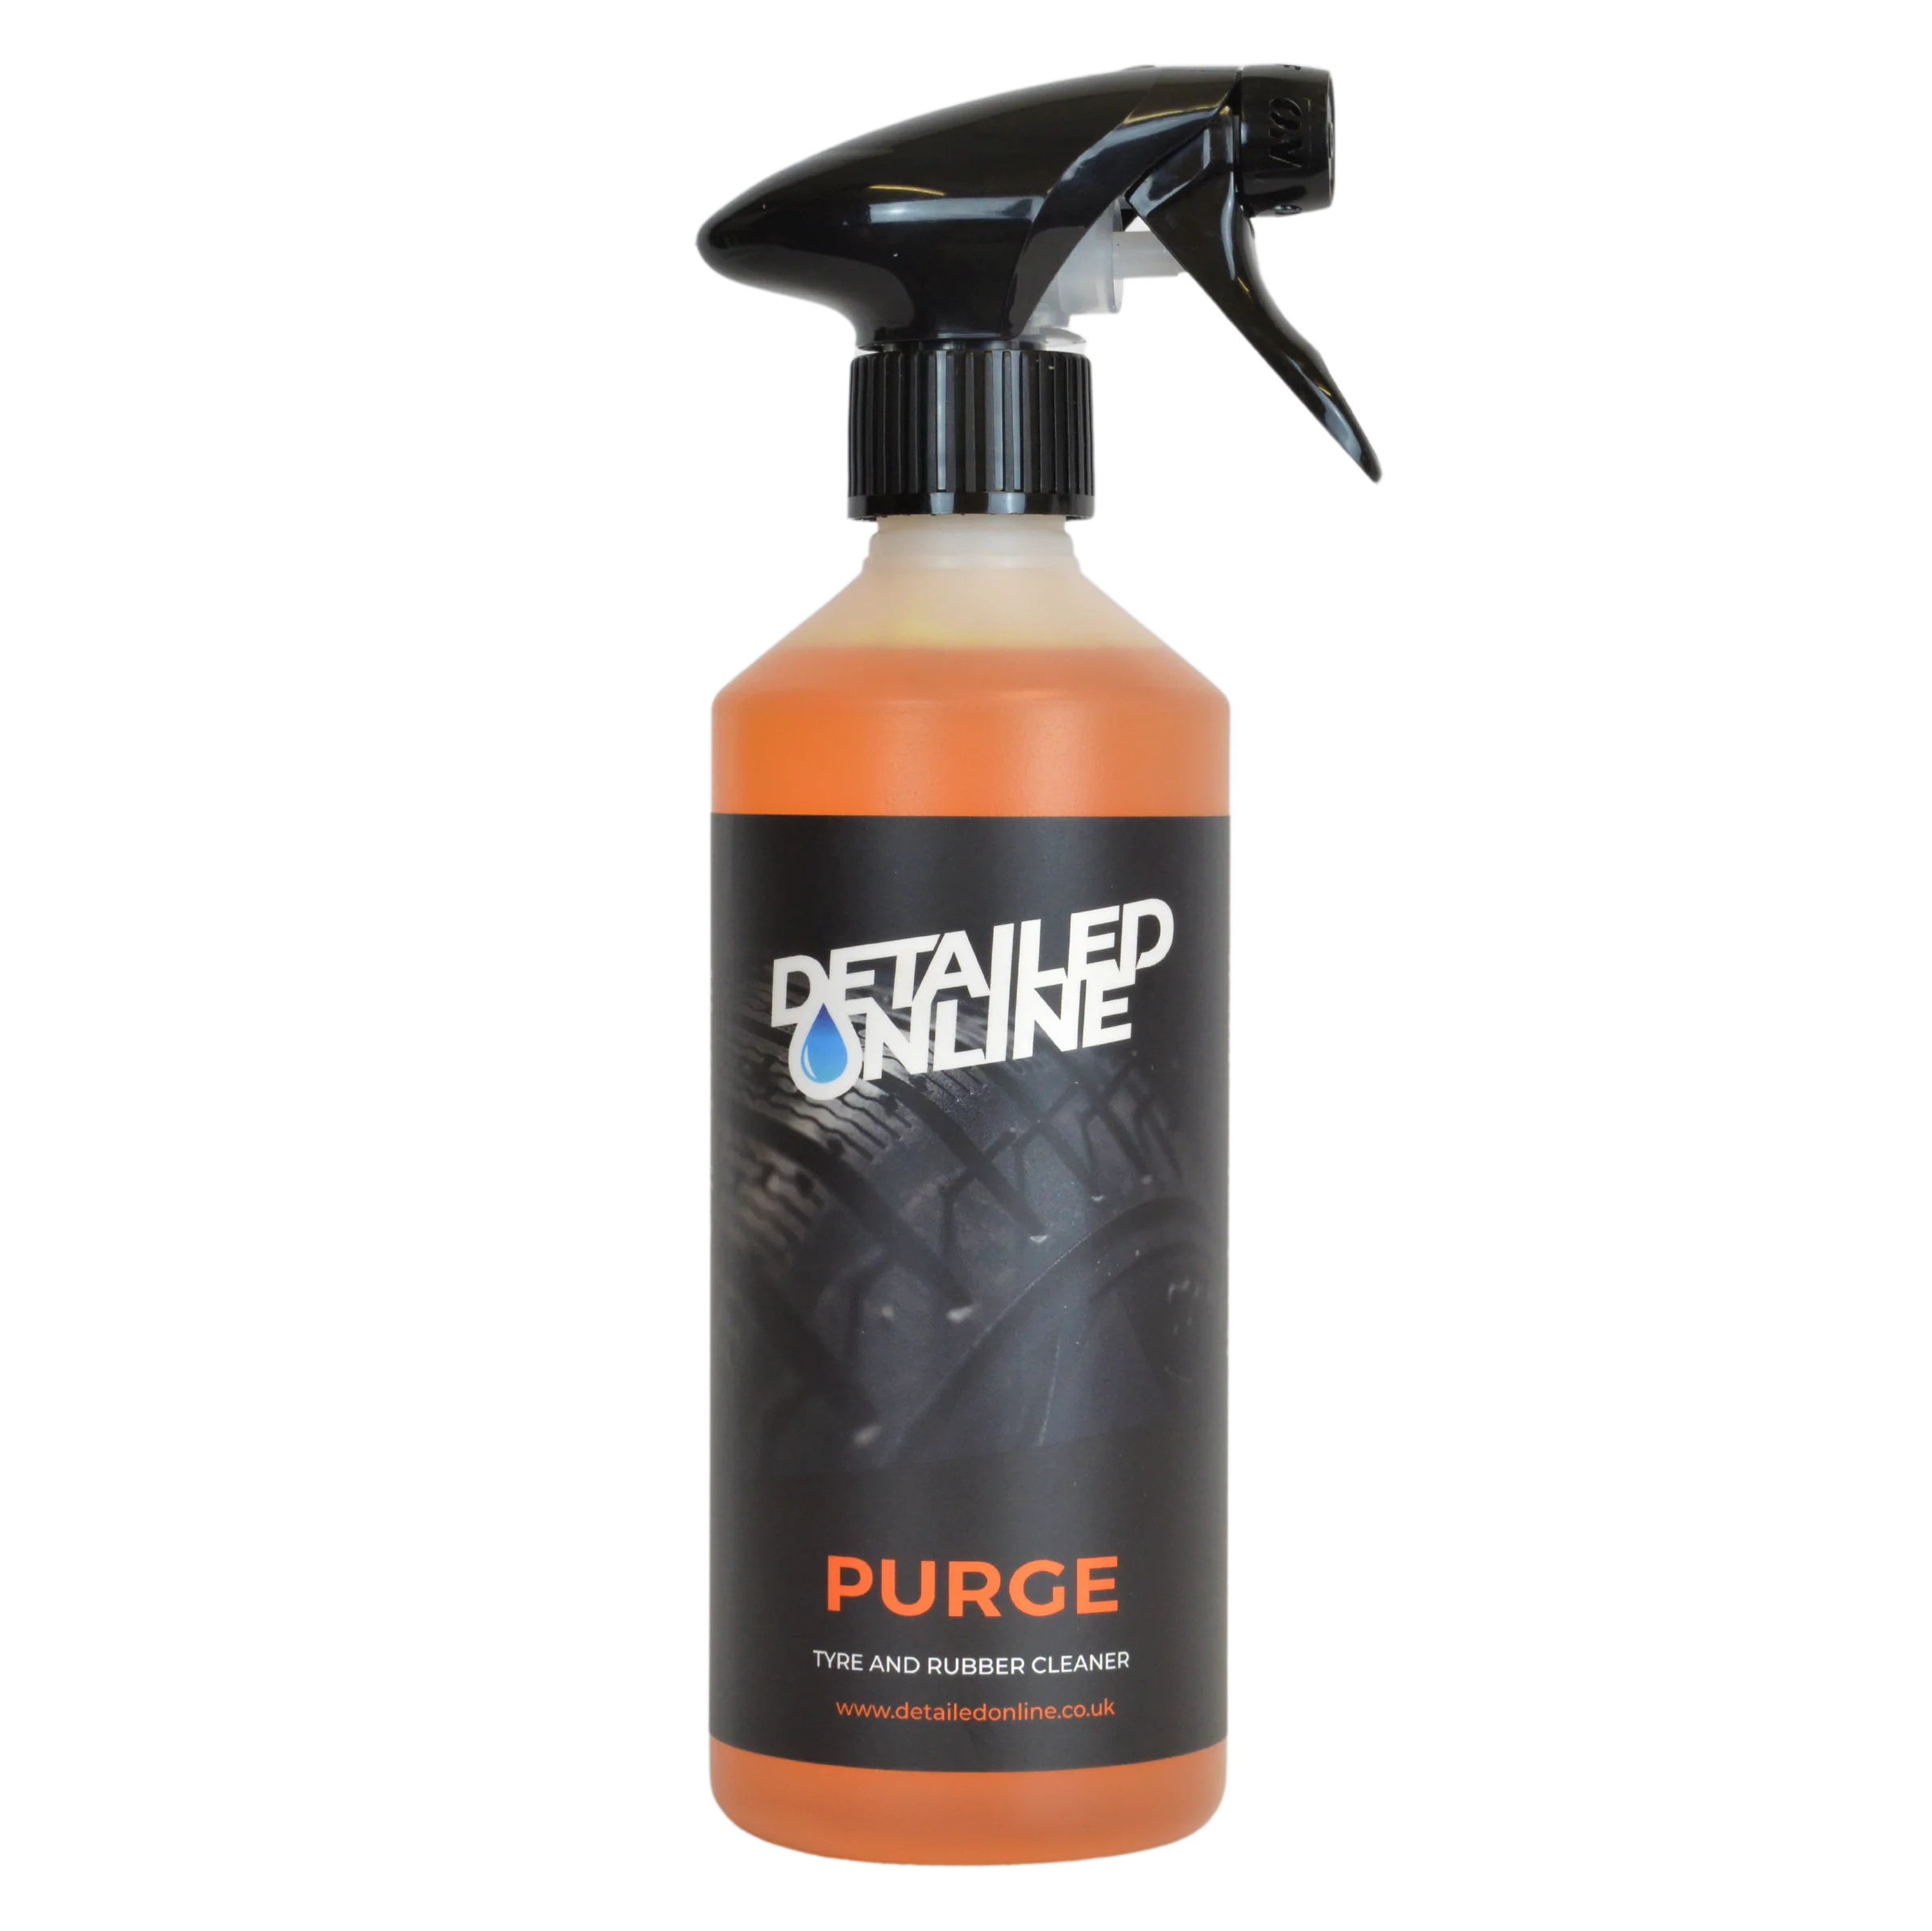 Purge (Tyre and Rubber Cleaner)